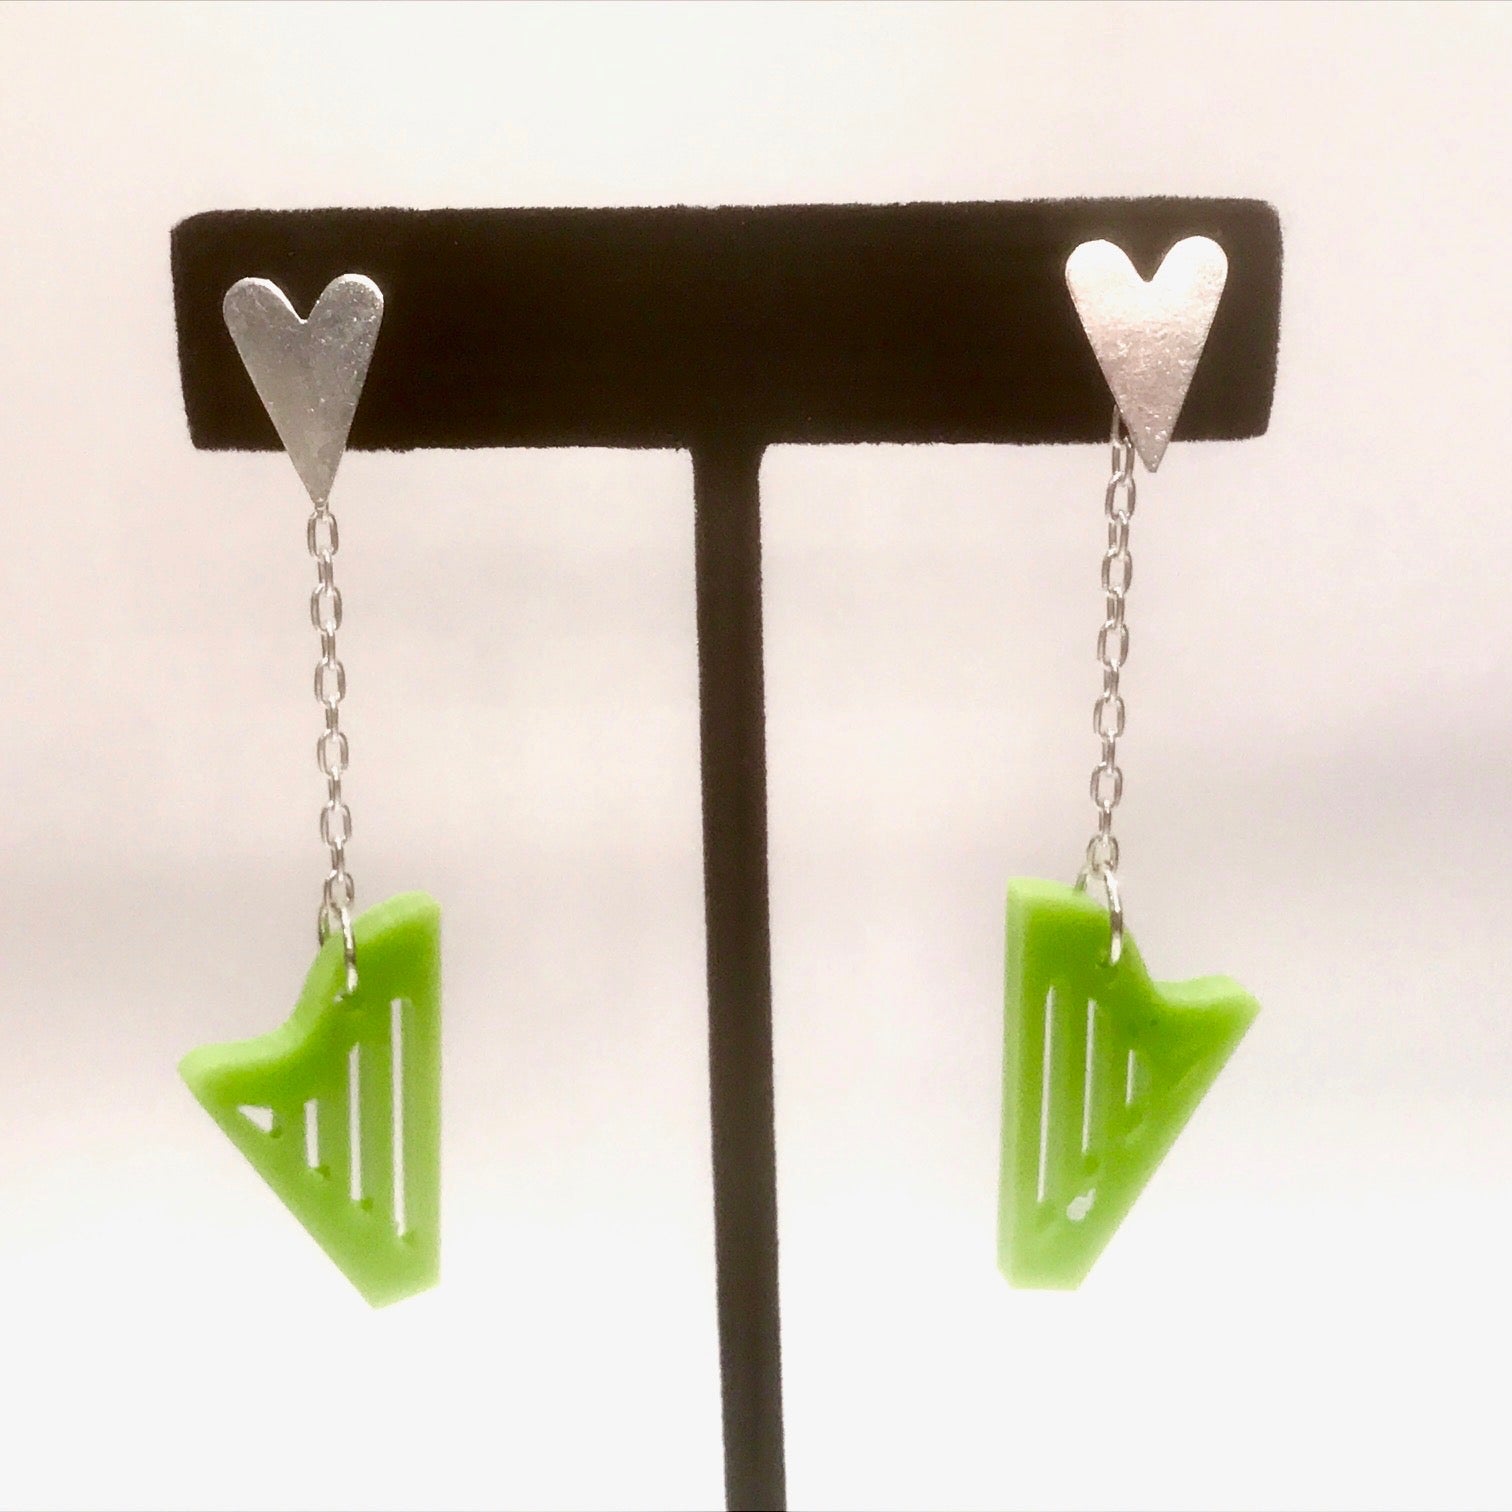 STERLING SILVER & GREEN ACRYLIC CLASSIC HARP stud earrings 30% OFF • LIMITED QUANTITY